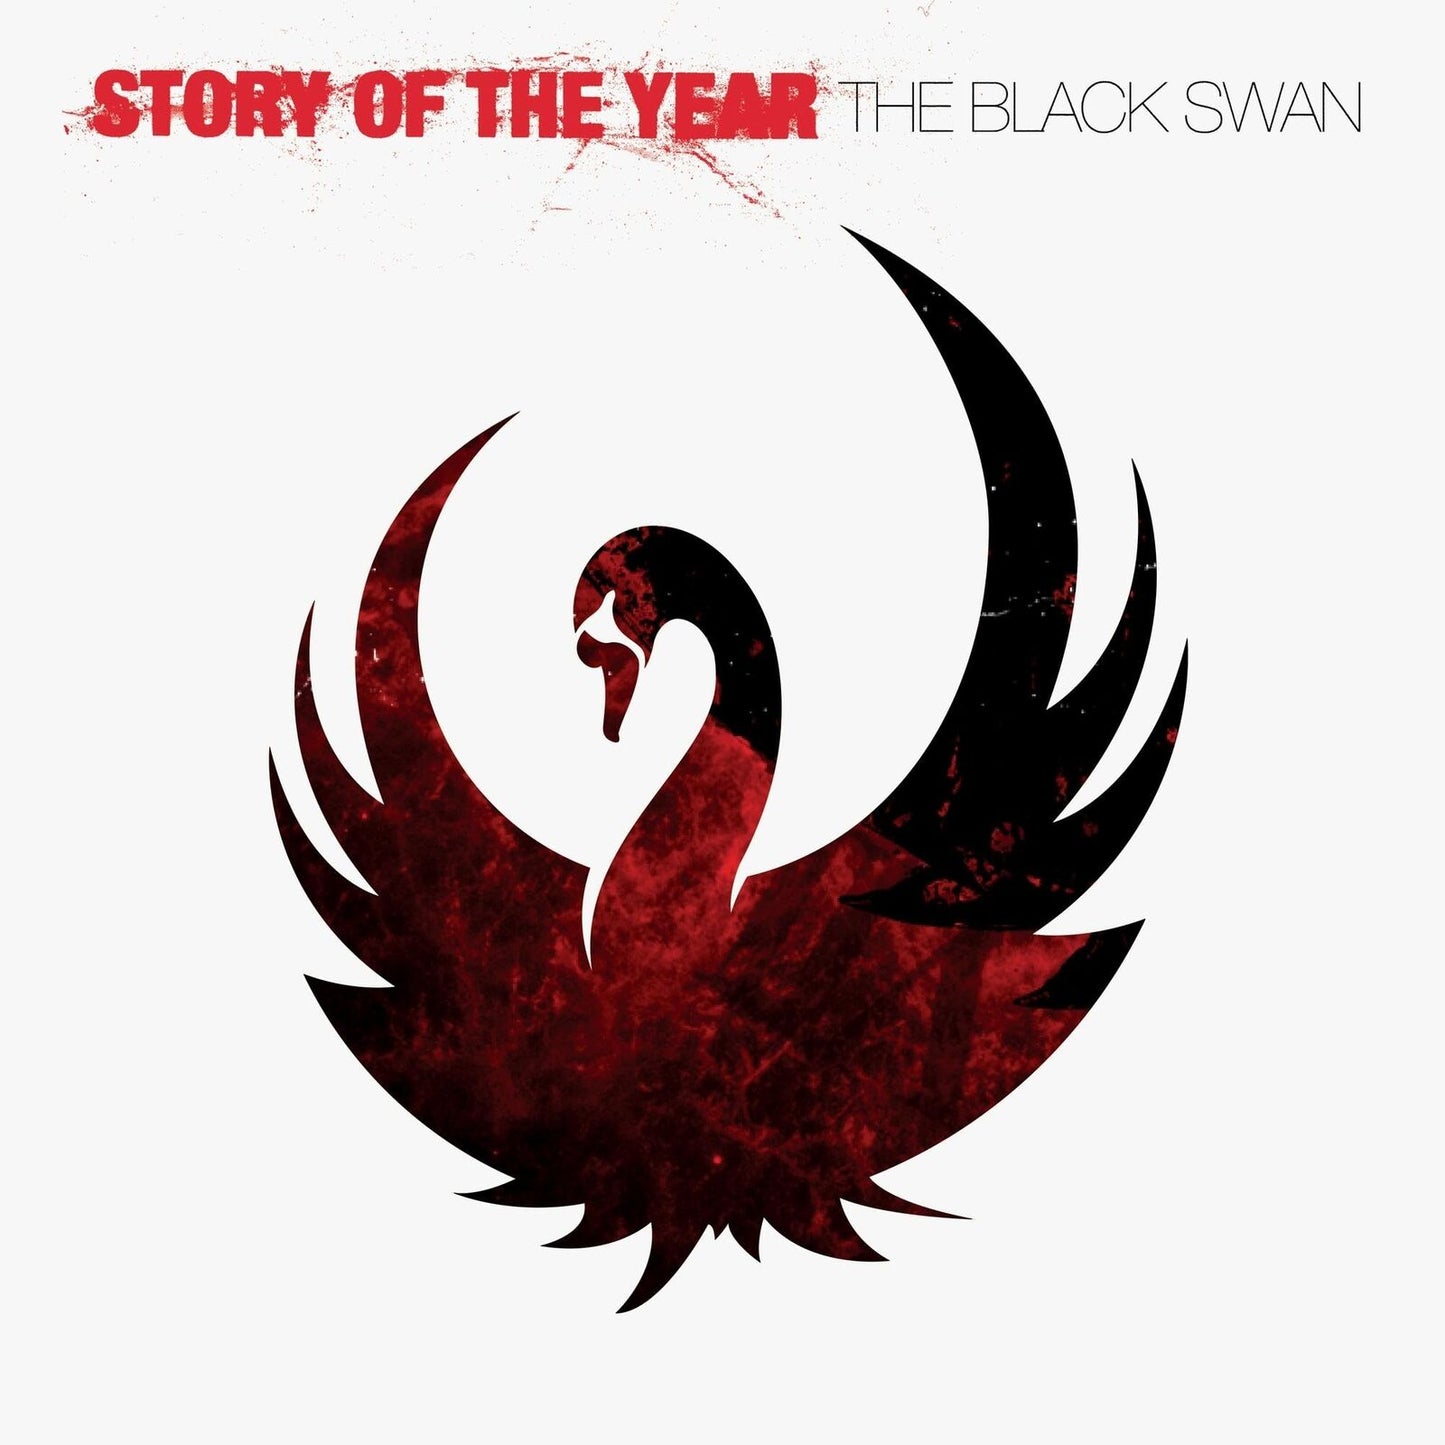 Story Of The Year "The Black Swan" LP